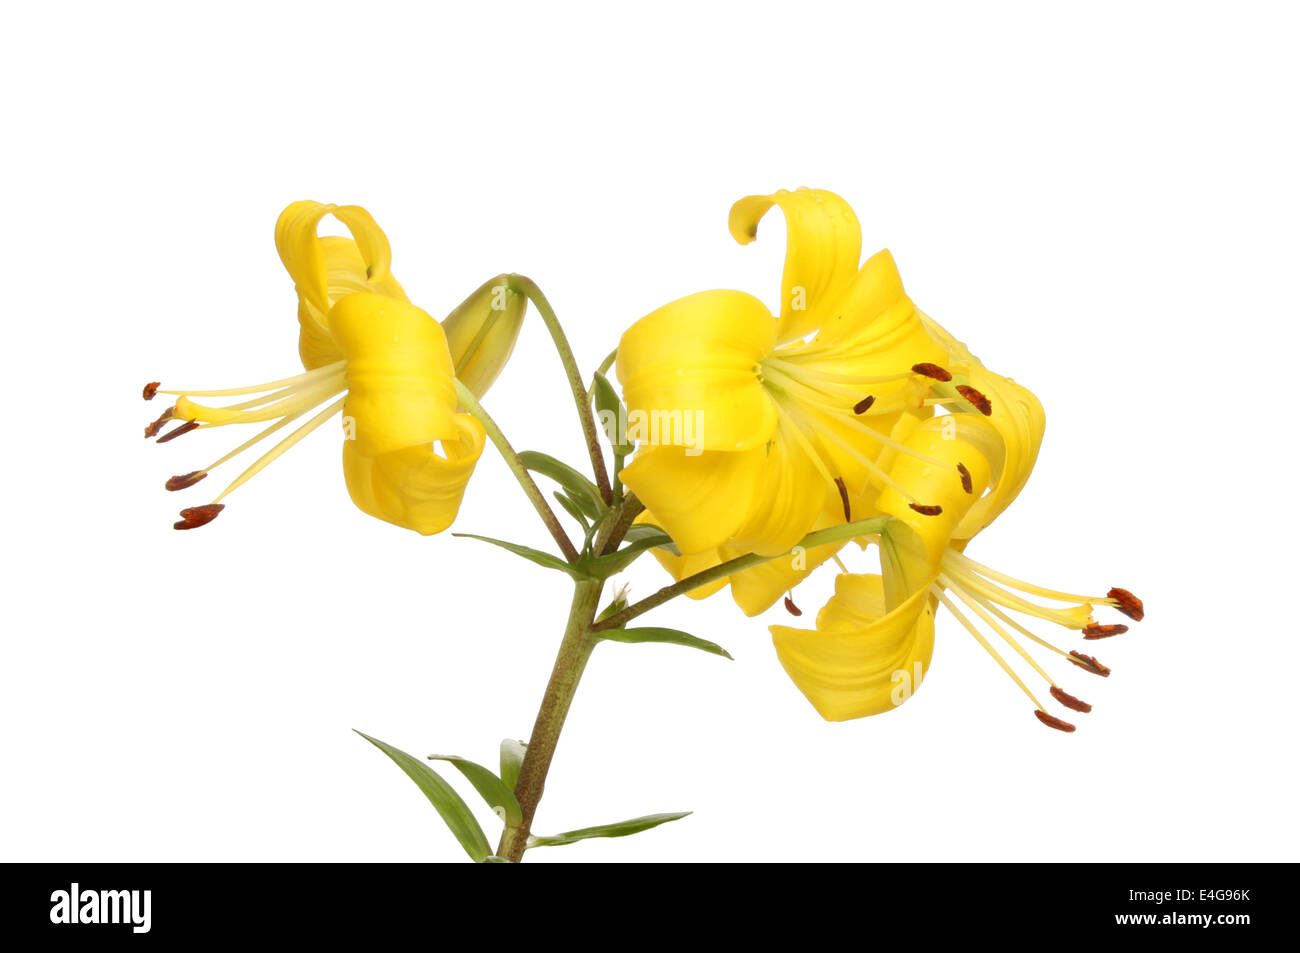 Yellow Asiatic lily flowers isolated against white Stock Photo